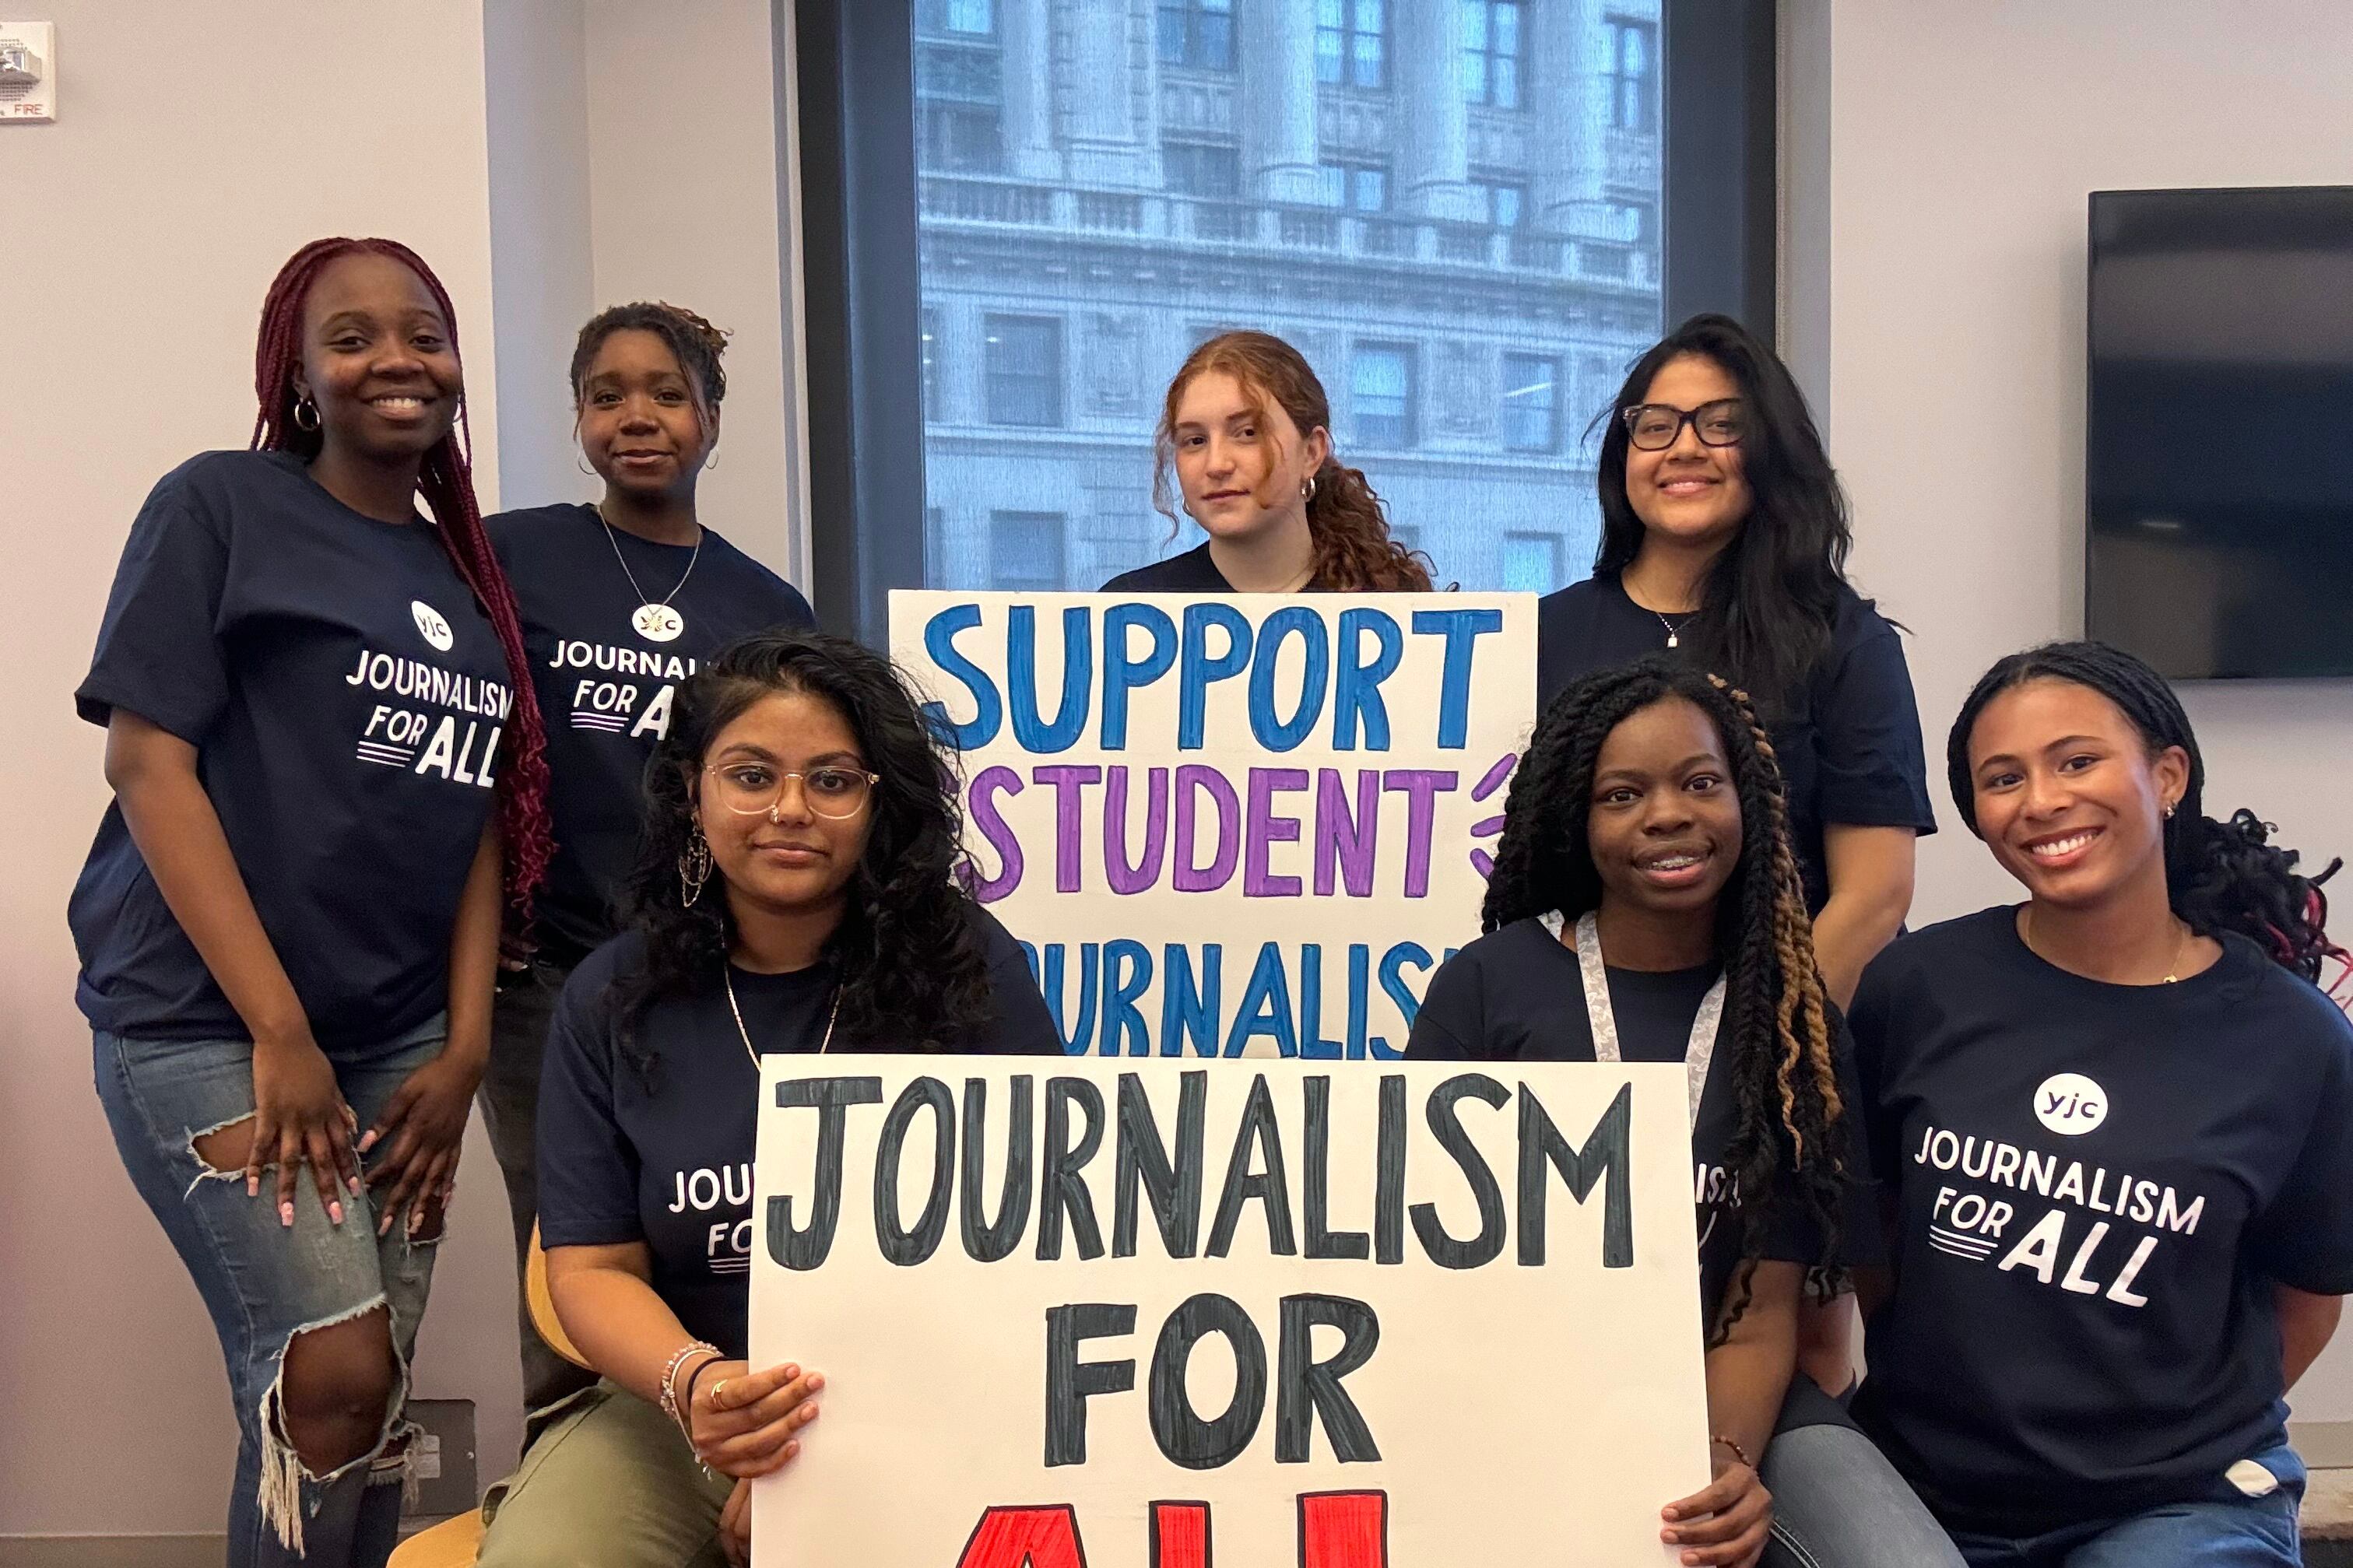 A group of young journalists wearing matching blue shirts pose for a photograph standing around two signs, one reads "Journalism for All," and Support Student Journalists."